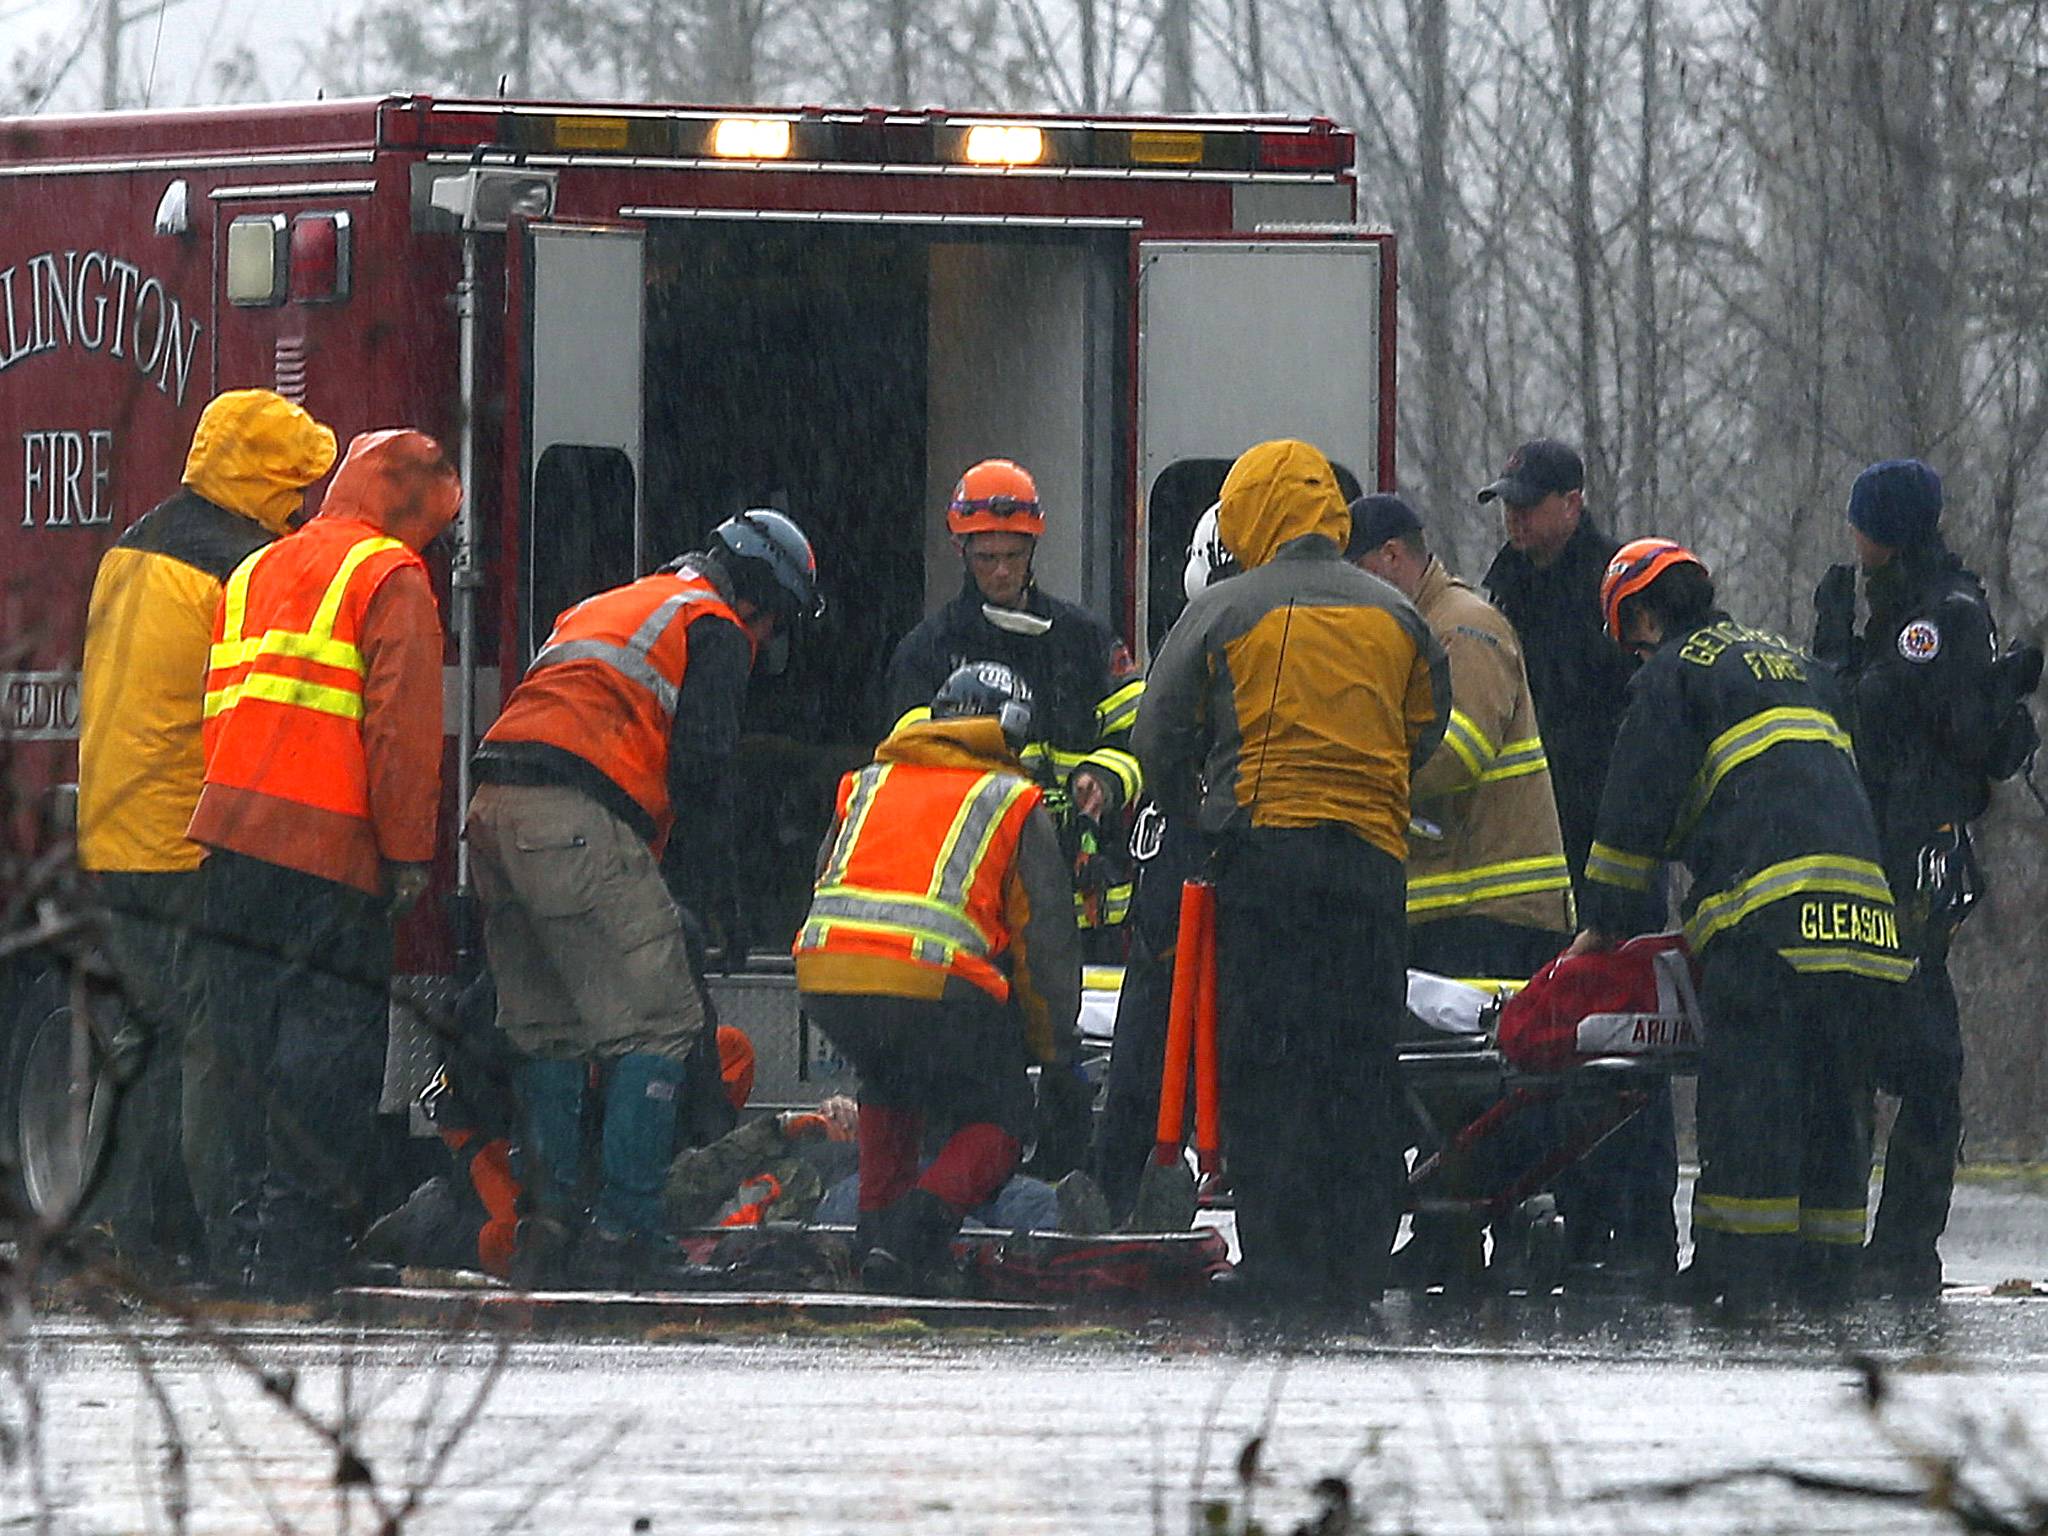 A helicopter and waiting ground crew transfer an injured worker into an ambulance